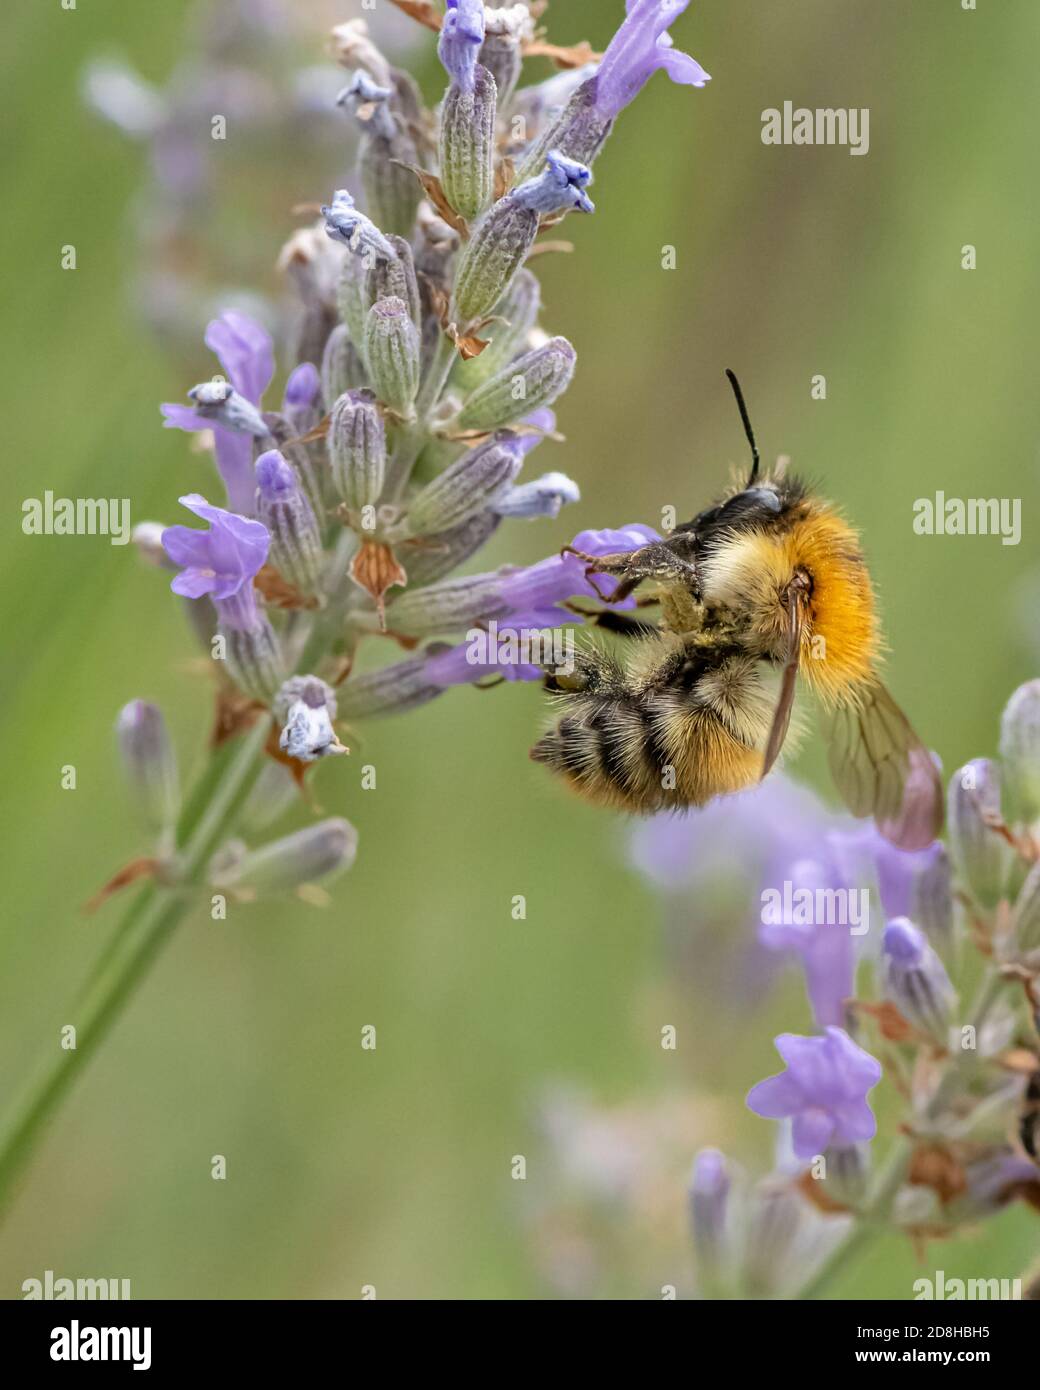 With pollen coated legs, a Common Carder bee hangs off the corolla of a spica lavender flower. Stock Photo